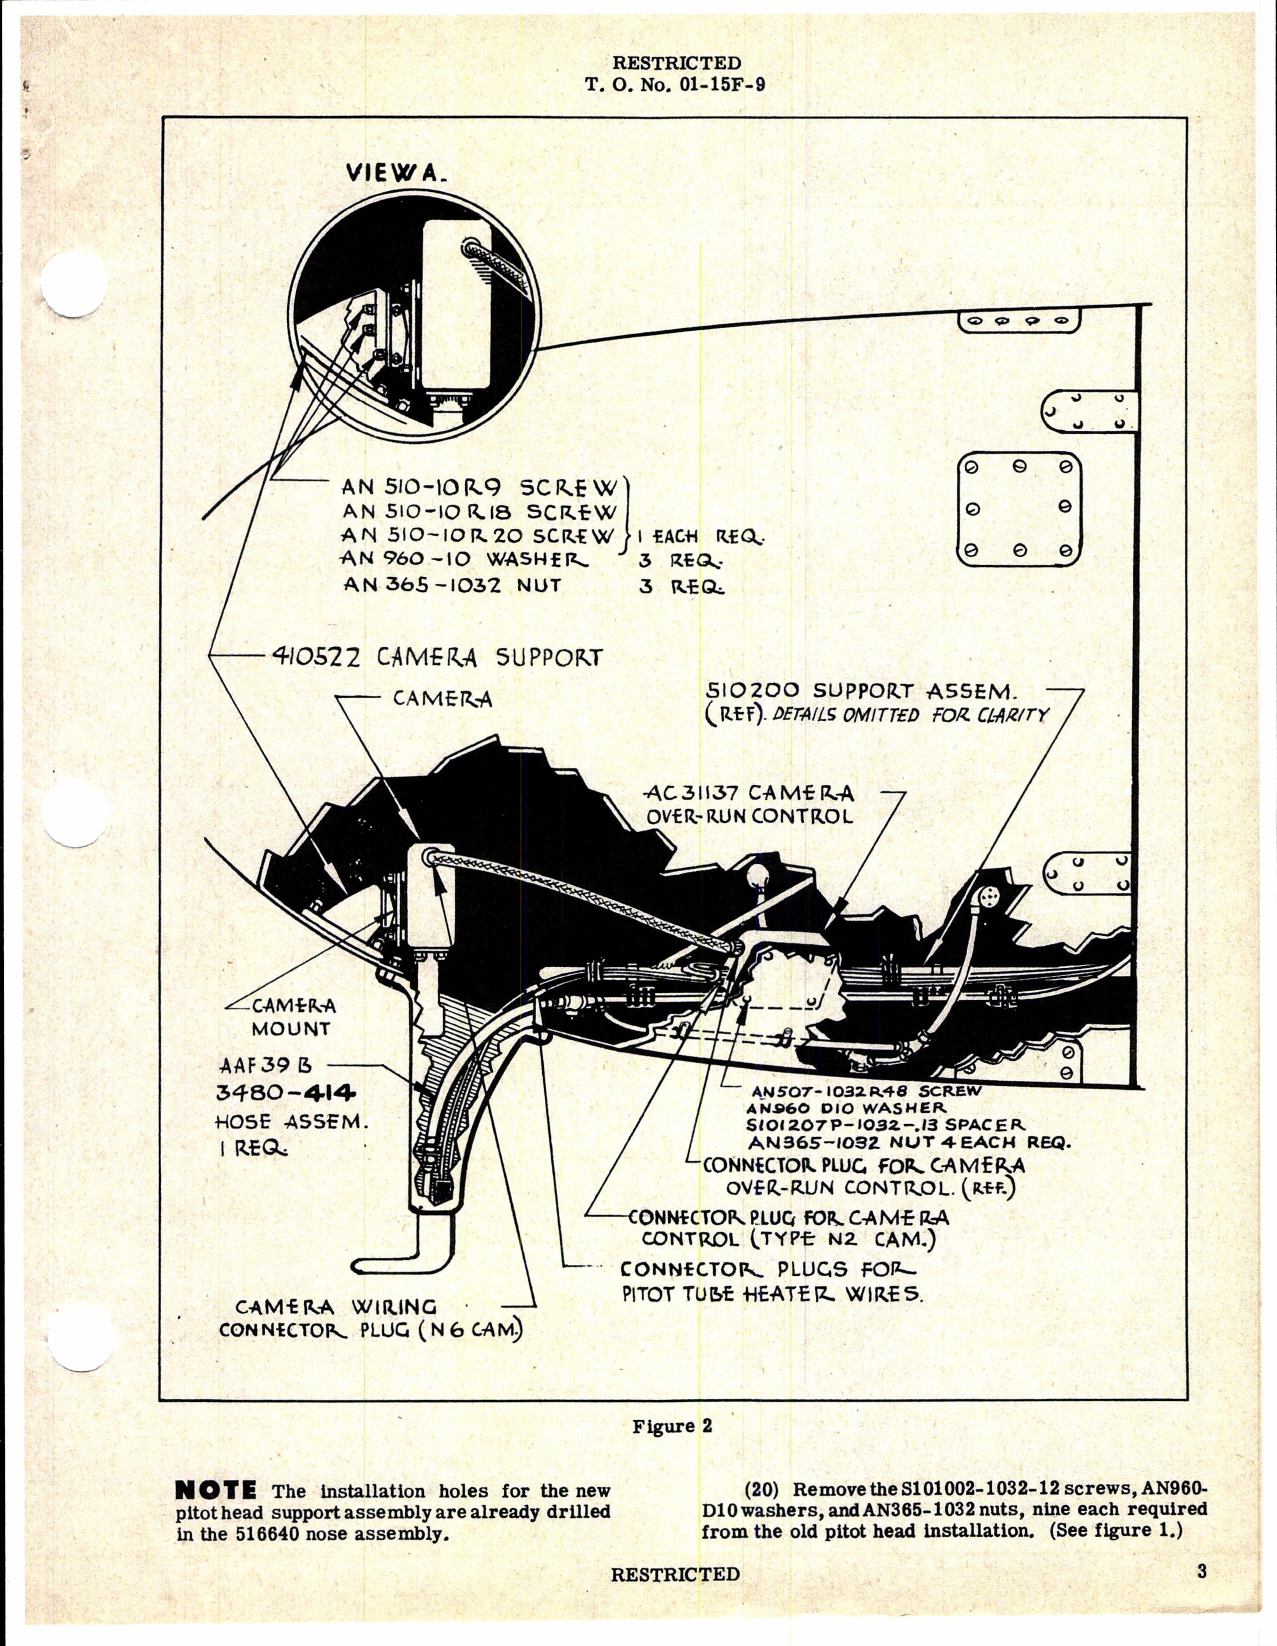 Sample page 3 from AirCorps Library document: Northrop - Installation of Fibre-Glass Cres Nacelle Nose for YP-61 and P-61A